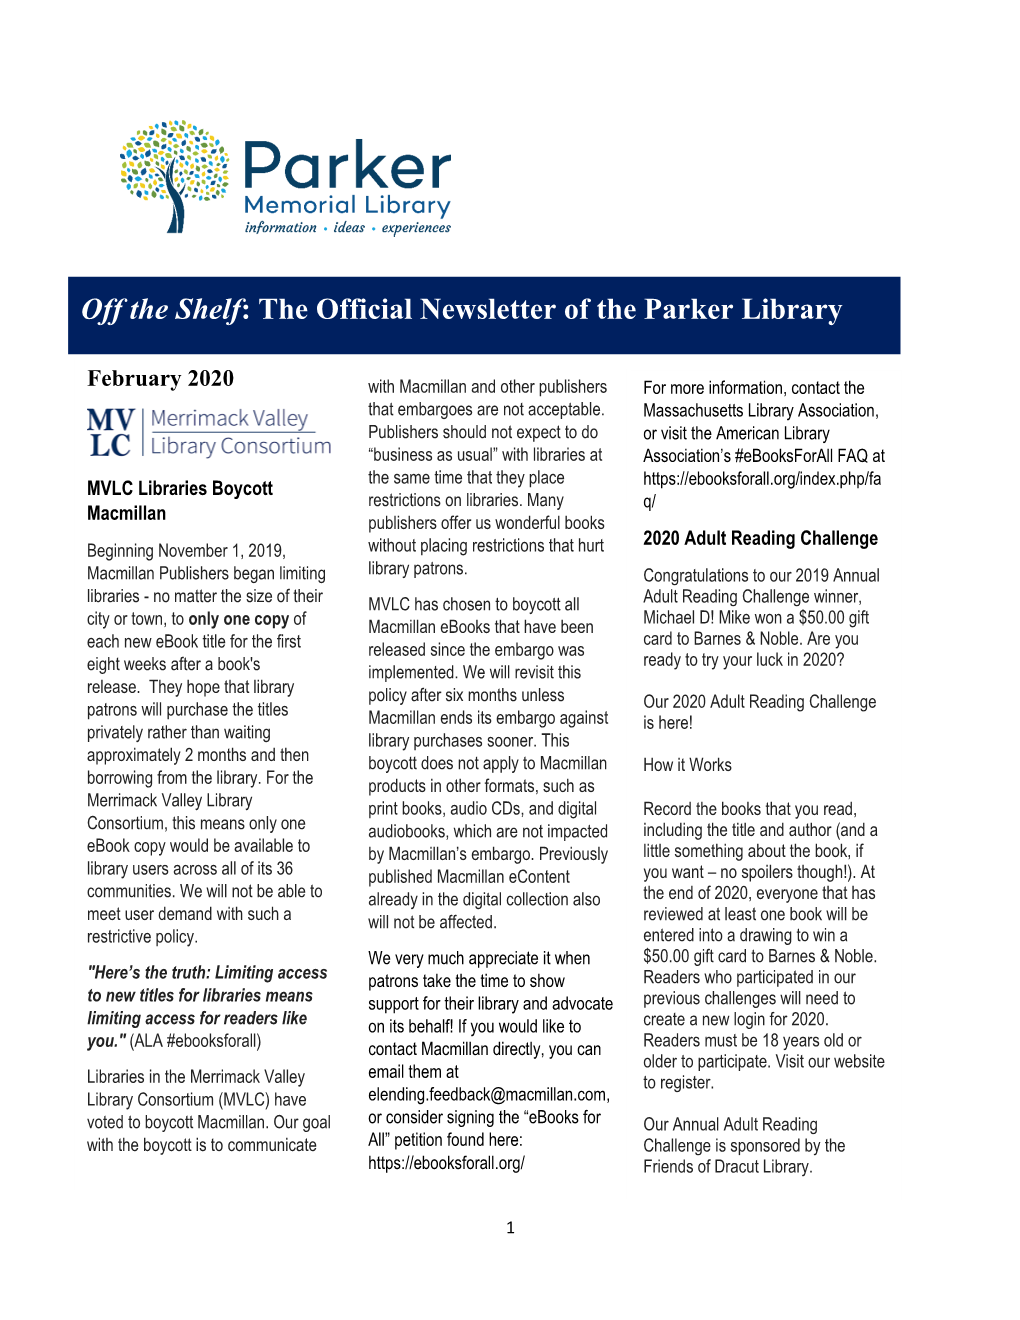 Off the Shelf: the Official Newsletter of the Parker Library